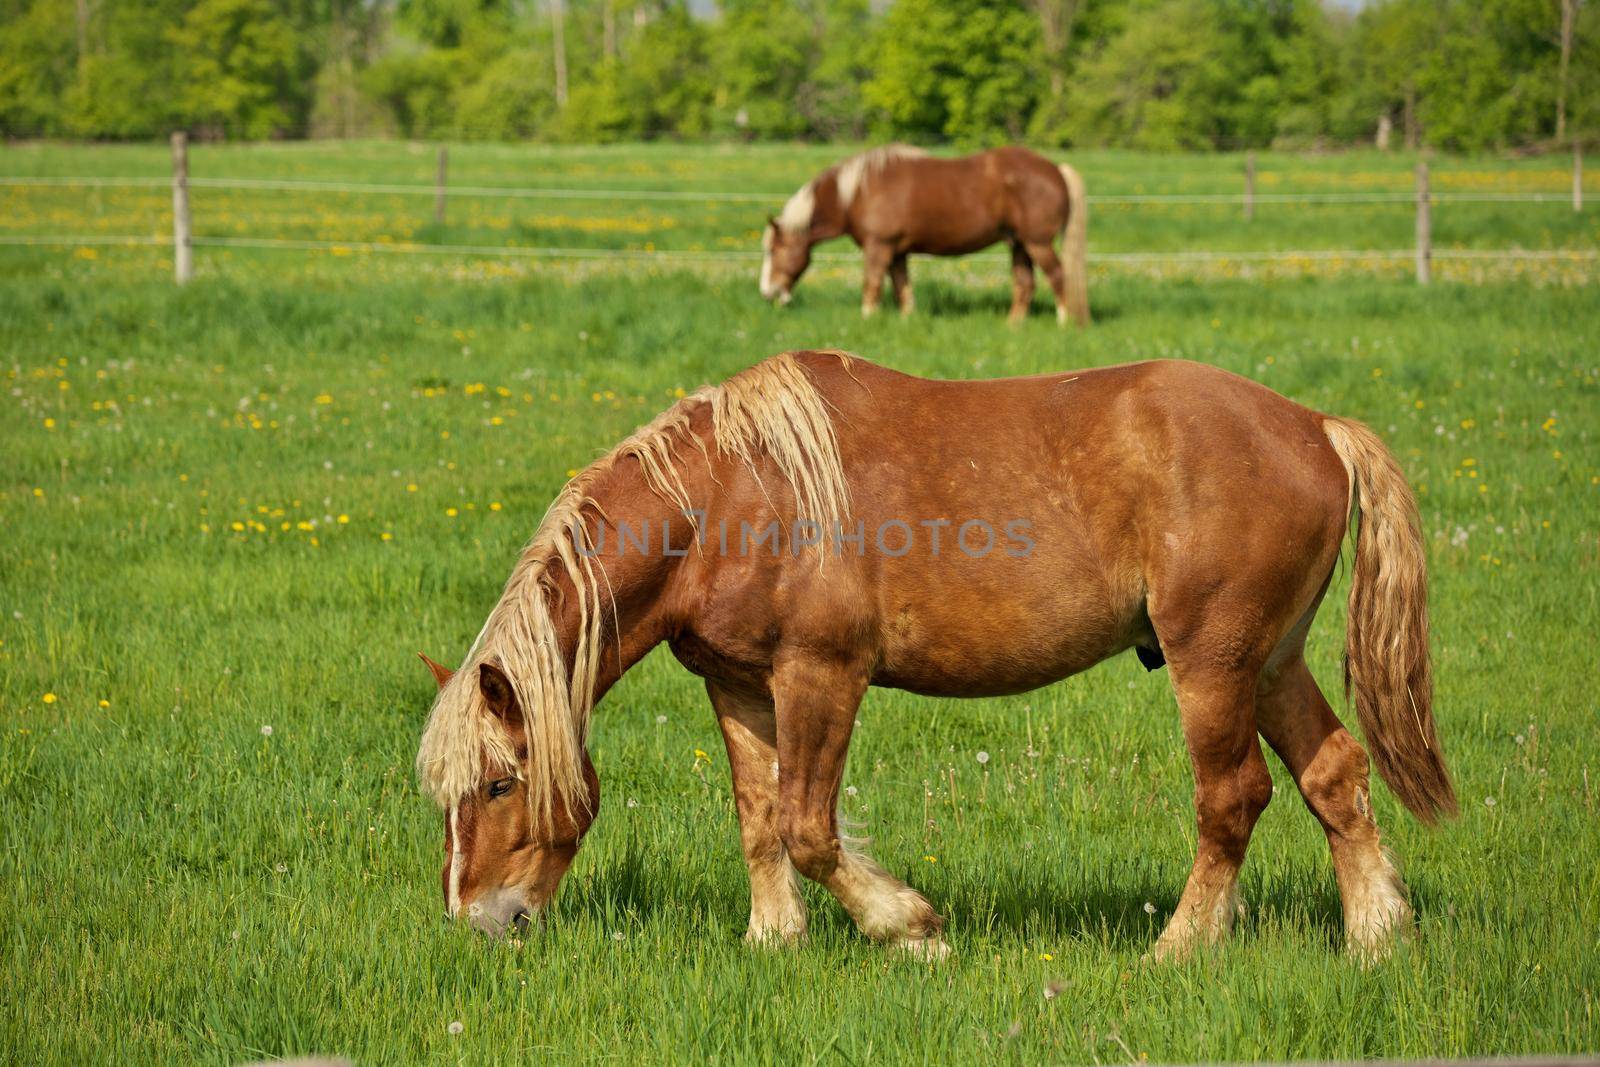 A Male Flaxen Chestnut Horse Stallion Colt Grazing in a Pasture Meadow on a Sunny Day by markvandam